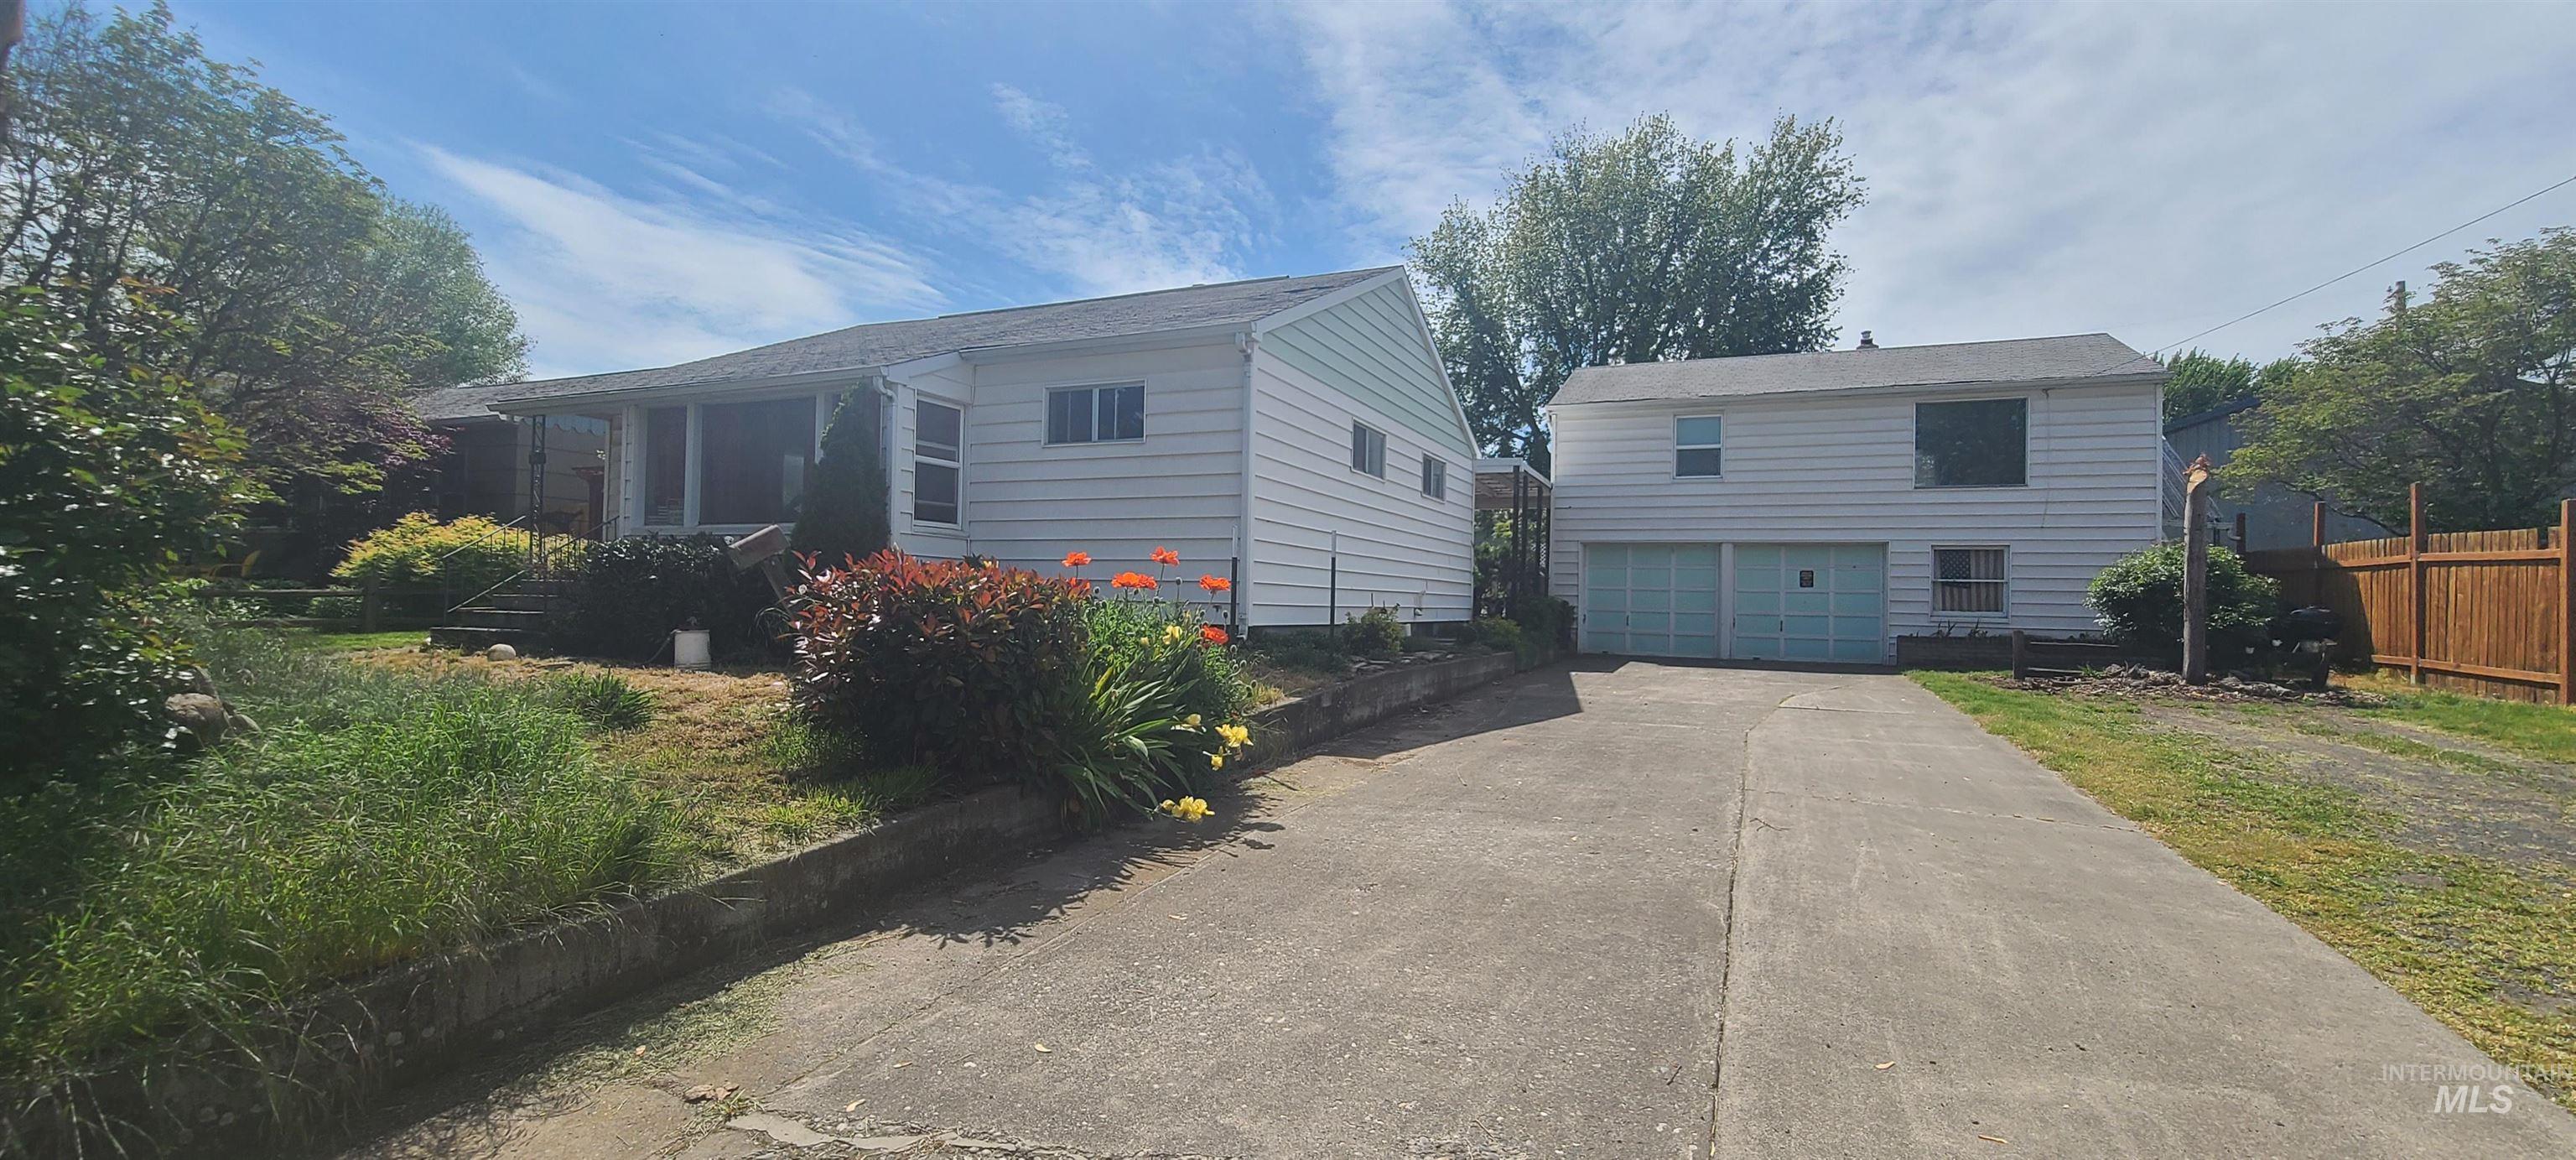 1312 14th Ave, Lewiston, Idaho 83501, 3 Bedrooms, 2 Bathrooms, Residential For Sale, Price $425,000,MLS 98843888